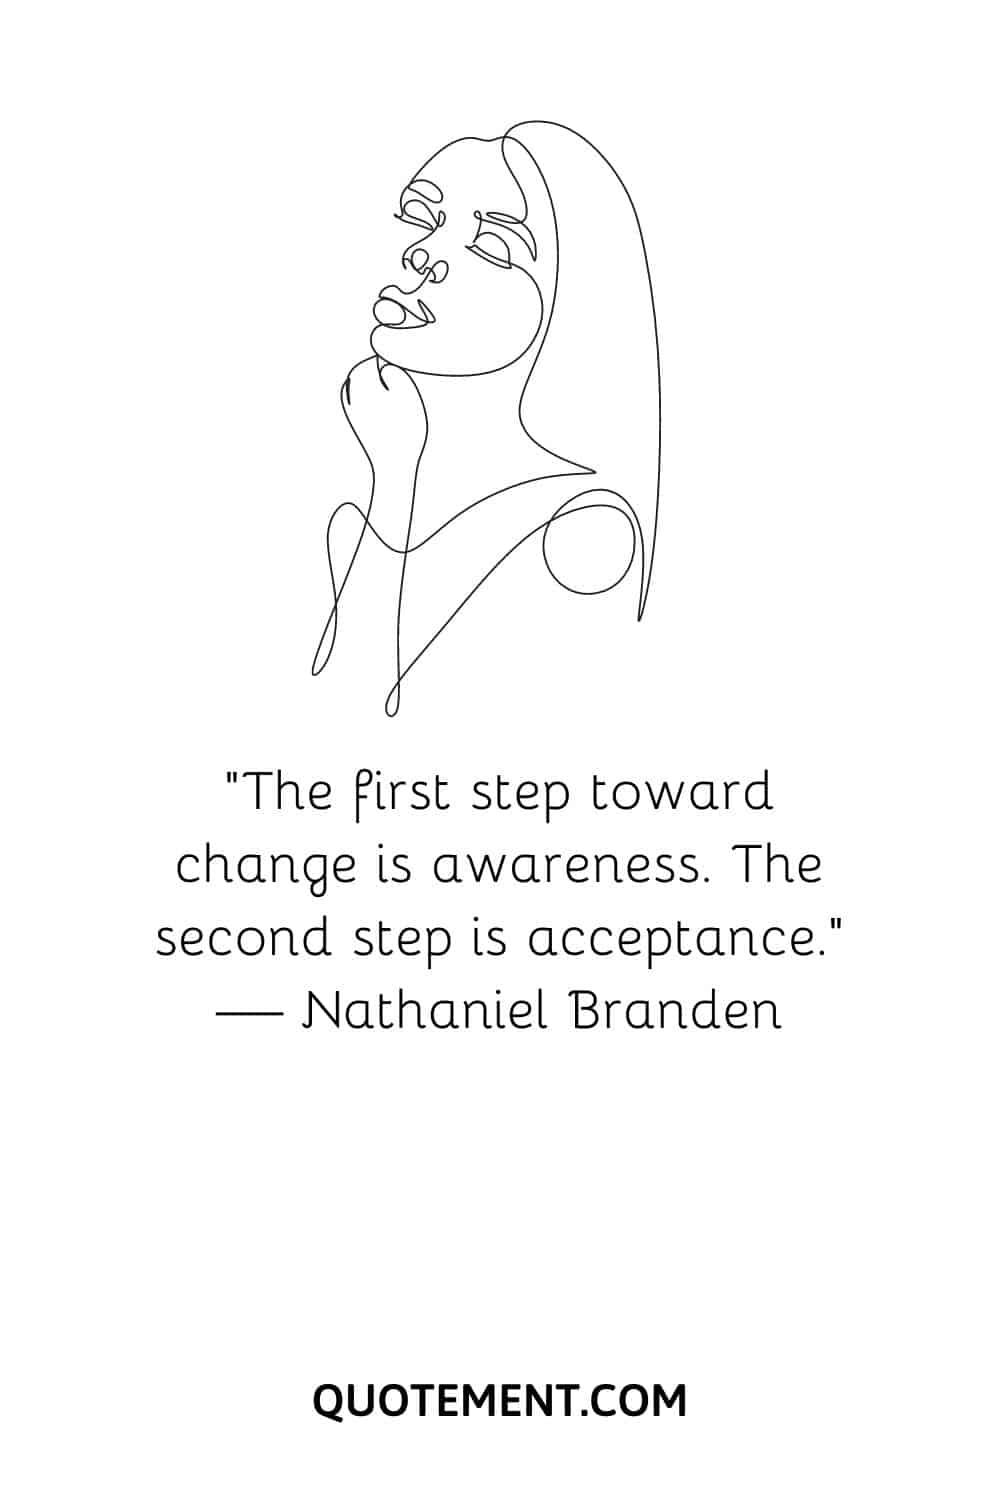 “The first step toward change is awareness. The second step is acceptance.” — Nathaniel Branden